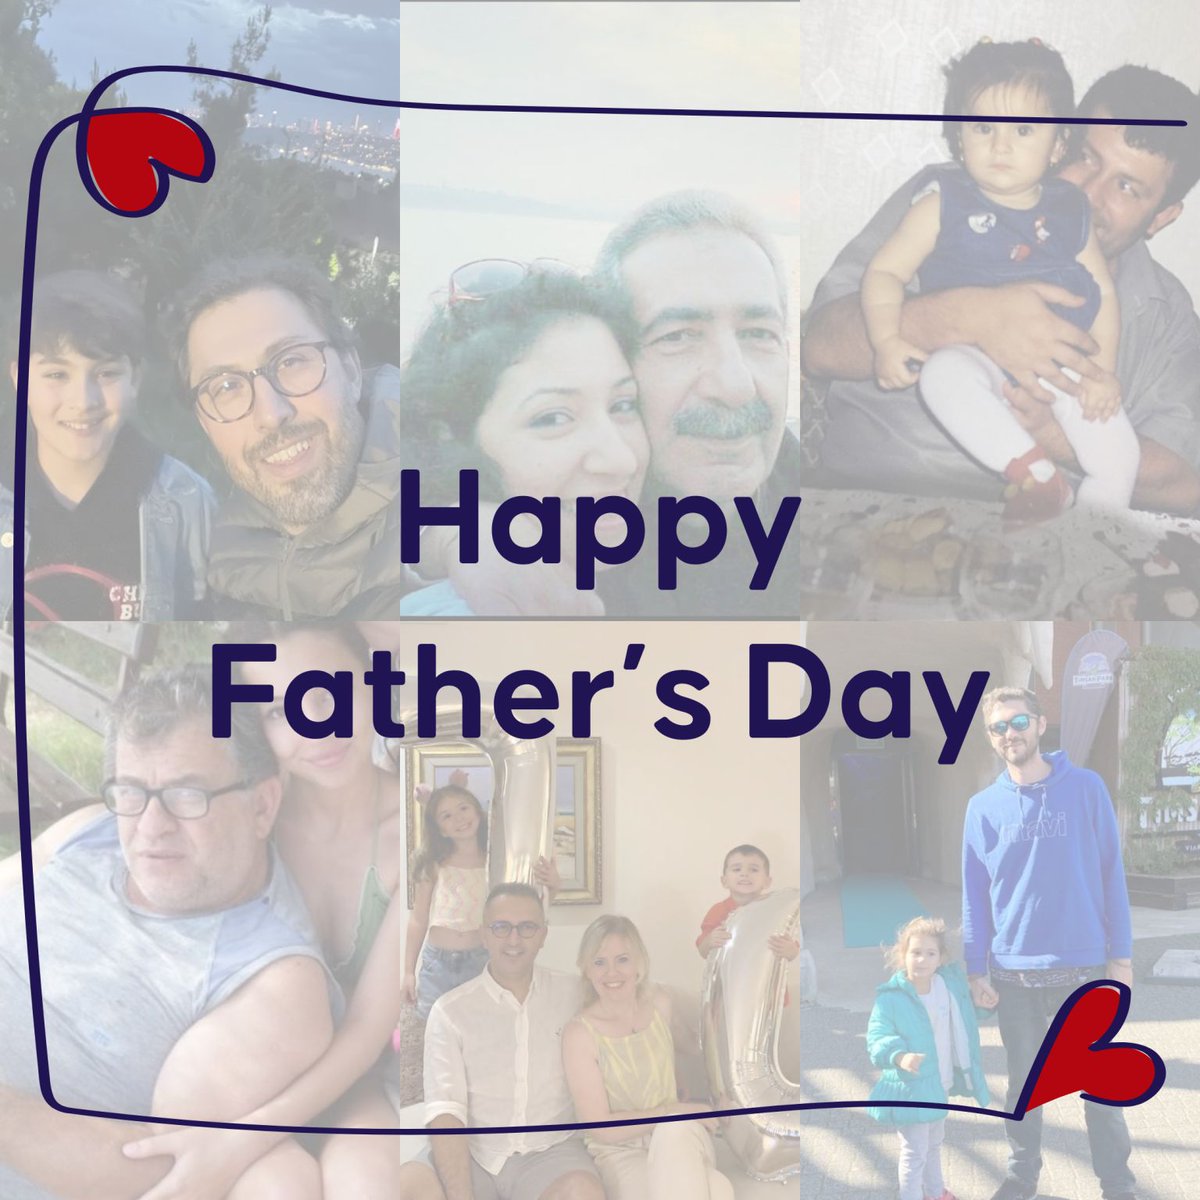 Celebrating amazing dads who've been our guiding light! Happy Father's Day! ❤️ #fathersday #guidinglight #happyfathersday ‍‍‍‍‍‍‍‍‍‍‍‍‍‍‍‍‍‍‍‍‍‍